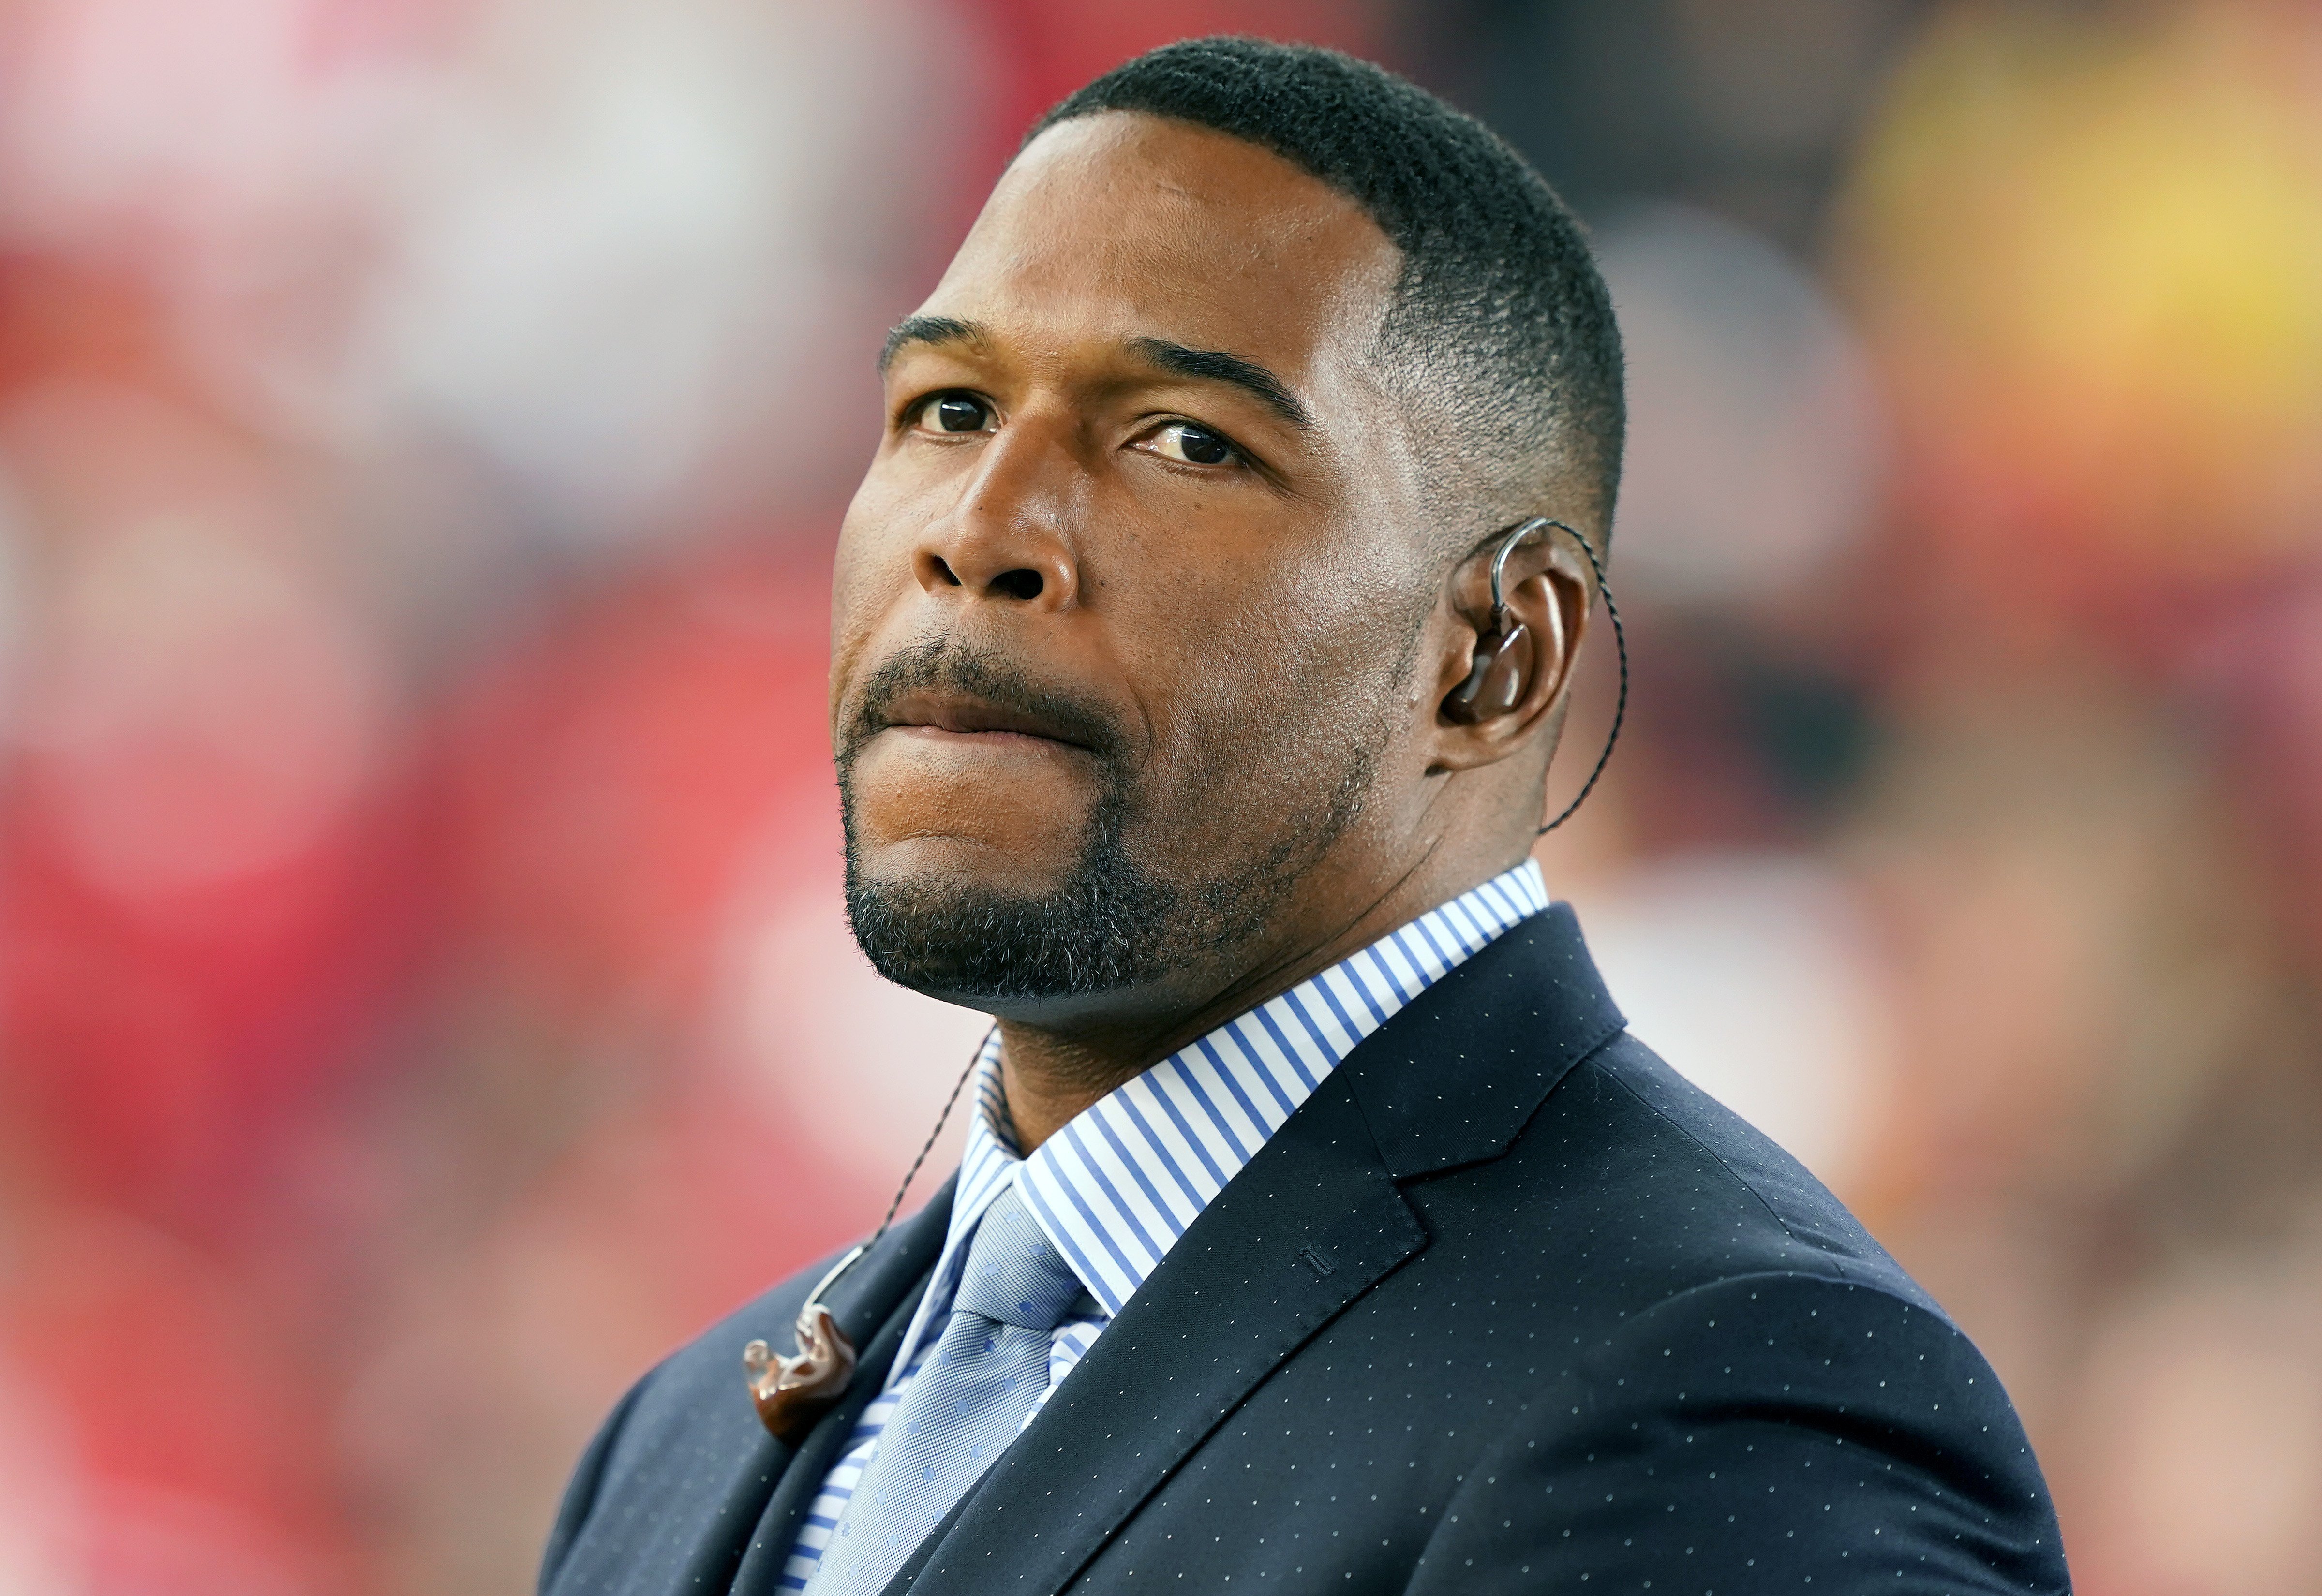 Michael Strahan at the NFC Championship game between the San Francisco 49ers and the Green Bay Packers in January 2020. | Source: Getty Images